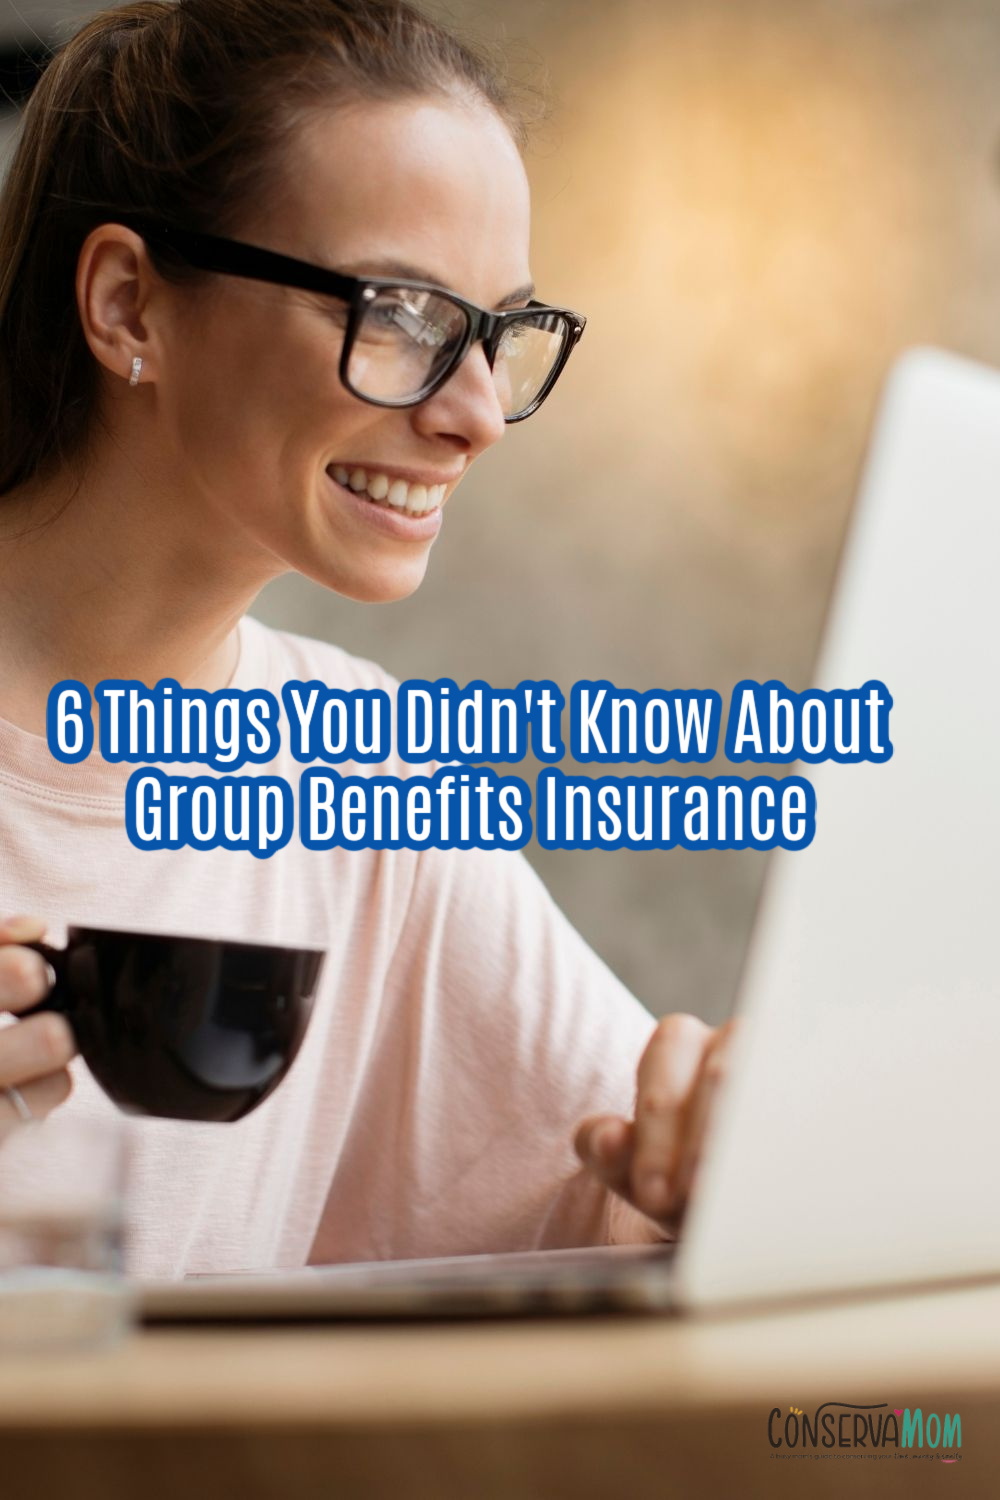 6 Things You Didn't Know About Group Benefits Insurance